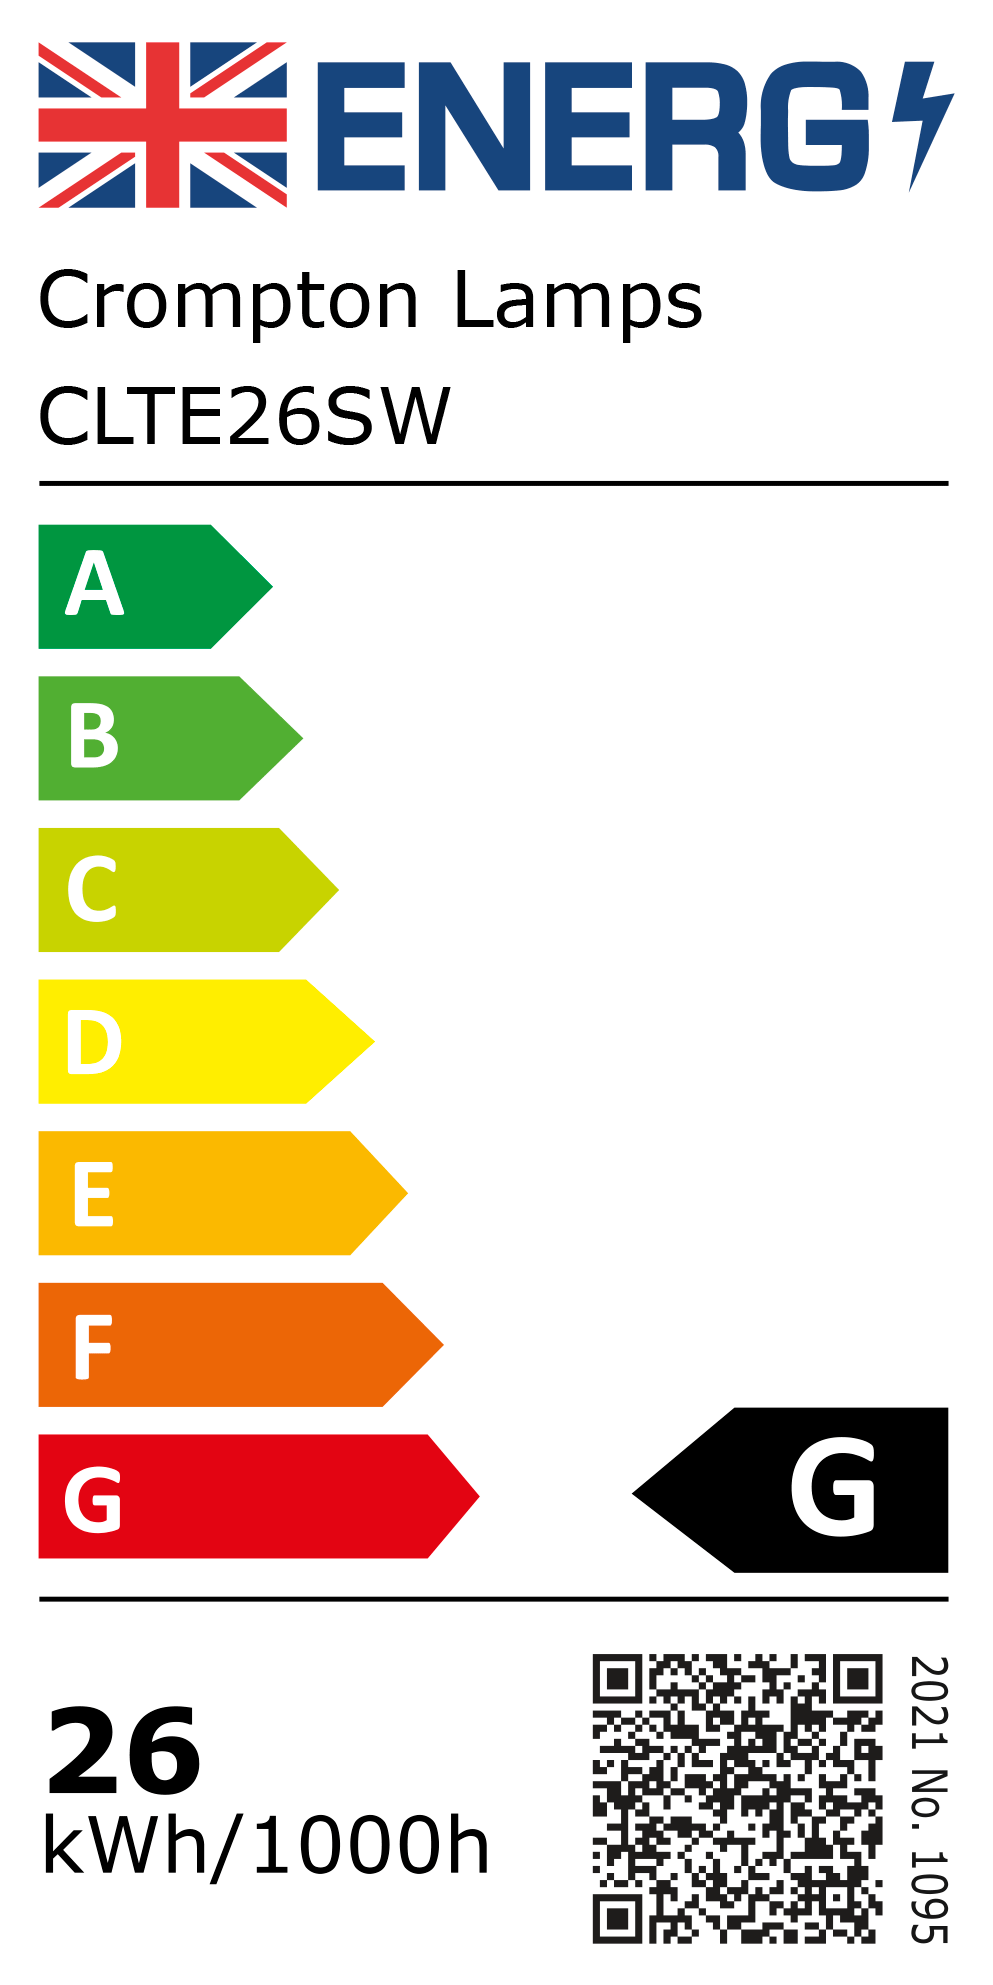 New 2021 Energy Rating Label: Stock Code CLTE26SW